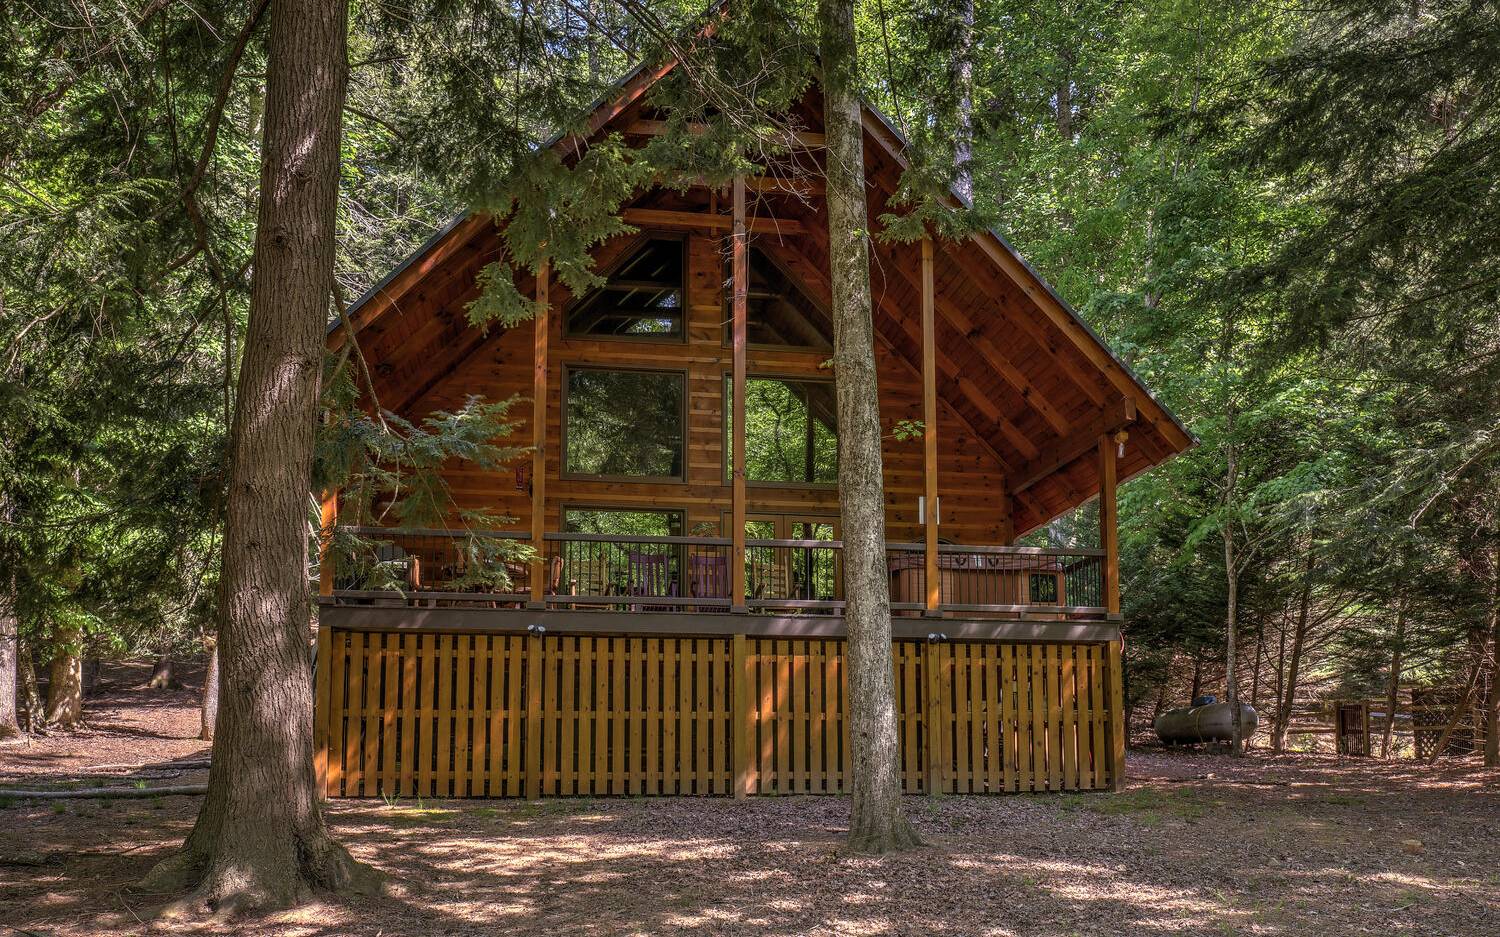 Beautiful River Front Home on the Coosawattee River. The owner of this home is a builder and he was actually hands-on building this beautiful home. He paid attention to detail and spared no expense in the construction process. This is truly a handcrafted home. See links and Docs for extras. https://www.mycrra.com/rec-center